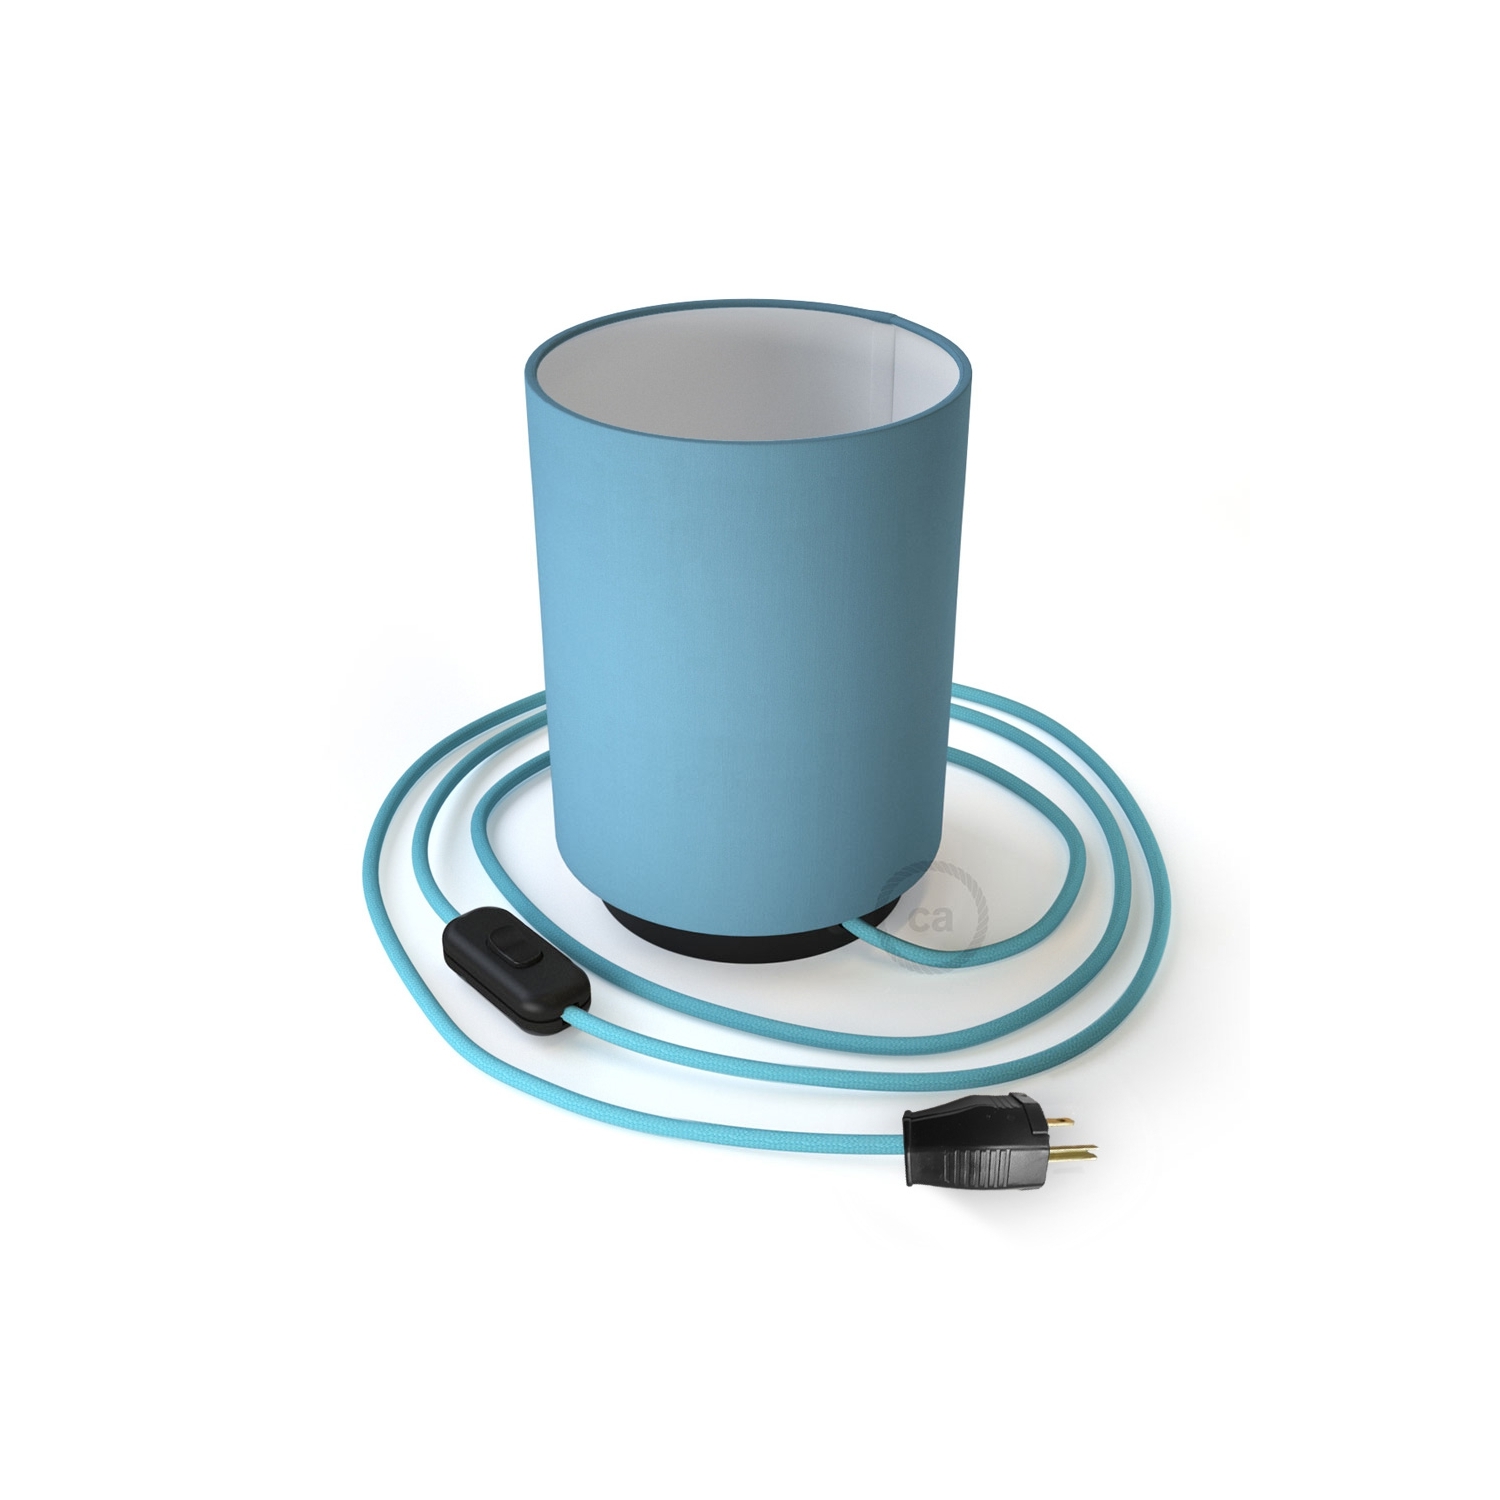 Posaluce with Blue Canvas Cylinder lampshade, black metal, with textile cable, switch and plug